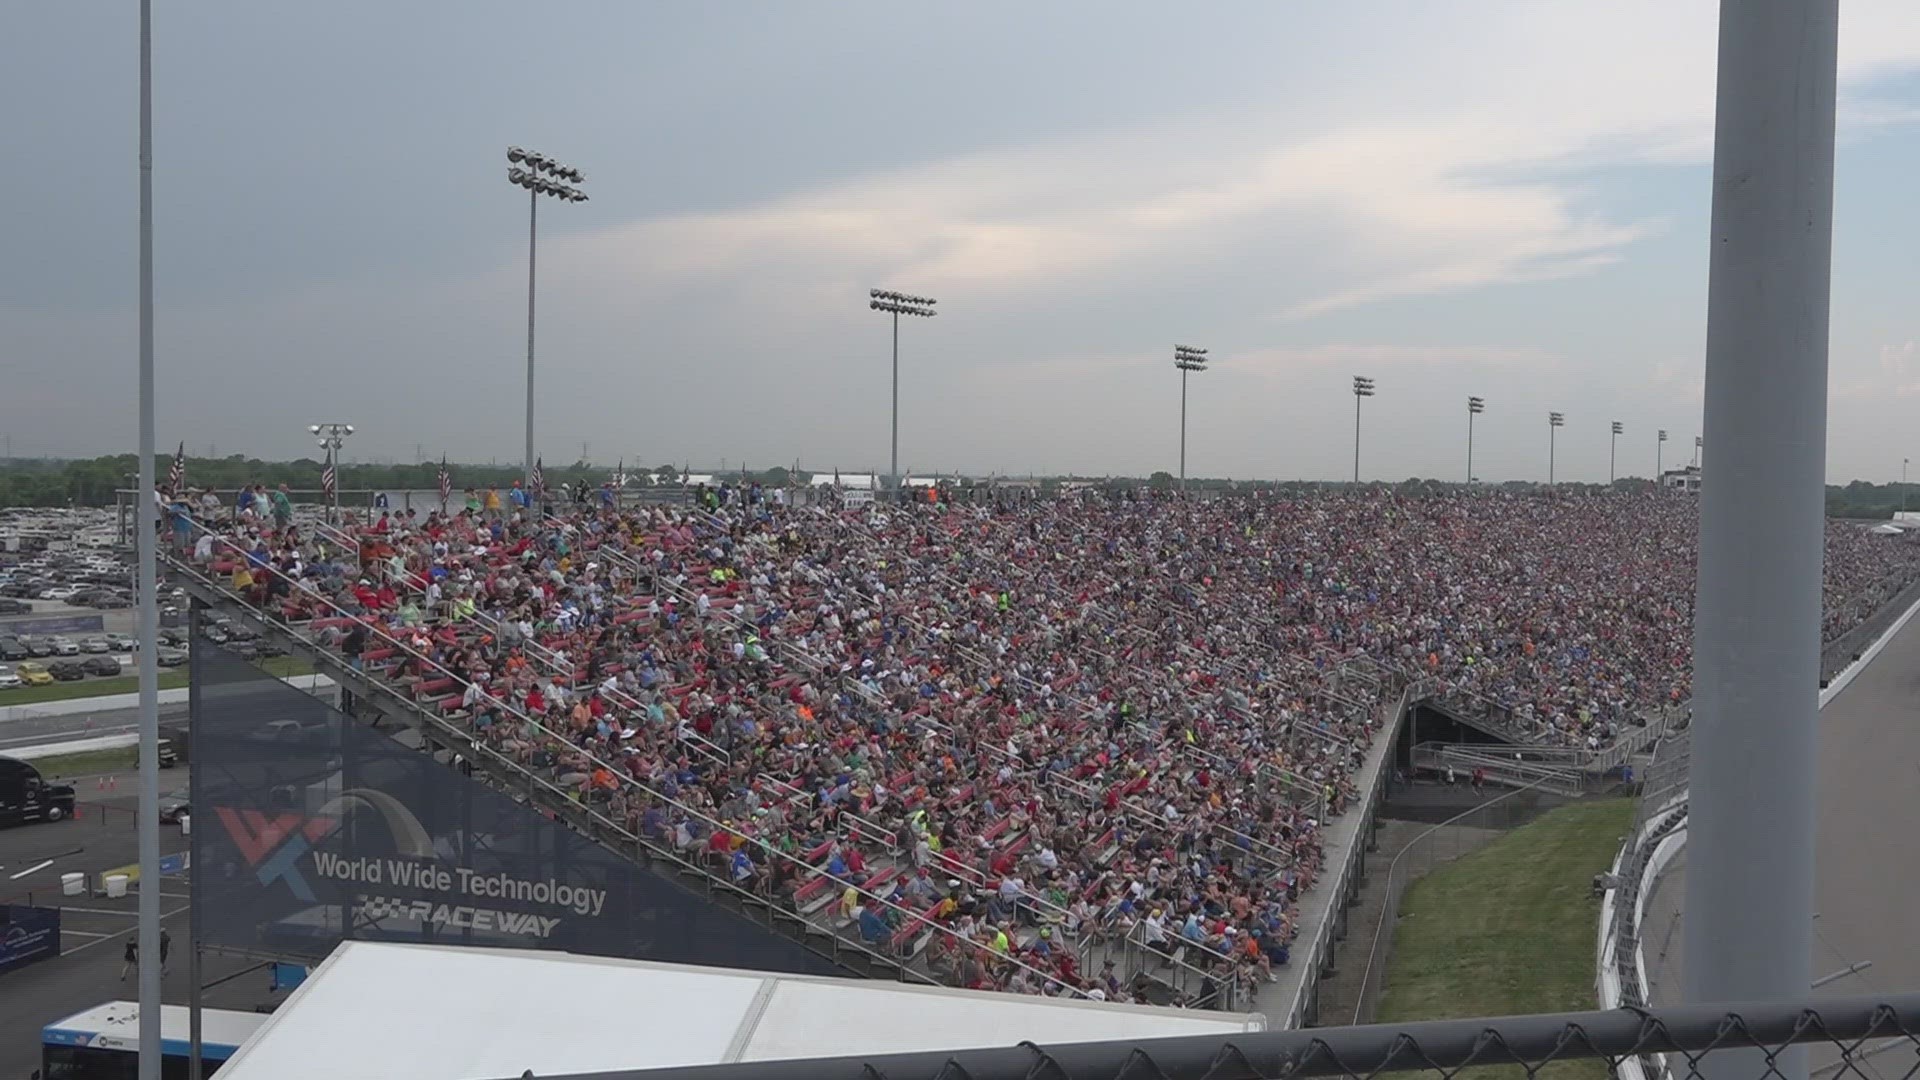 Sold-out Enjoy Illinois 300 race brings in millions for Illinois ksdk